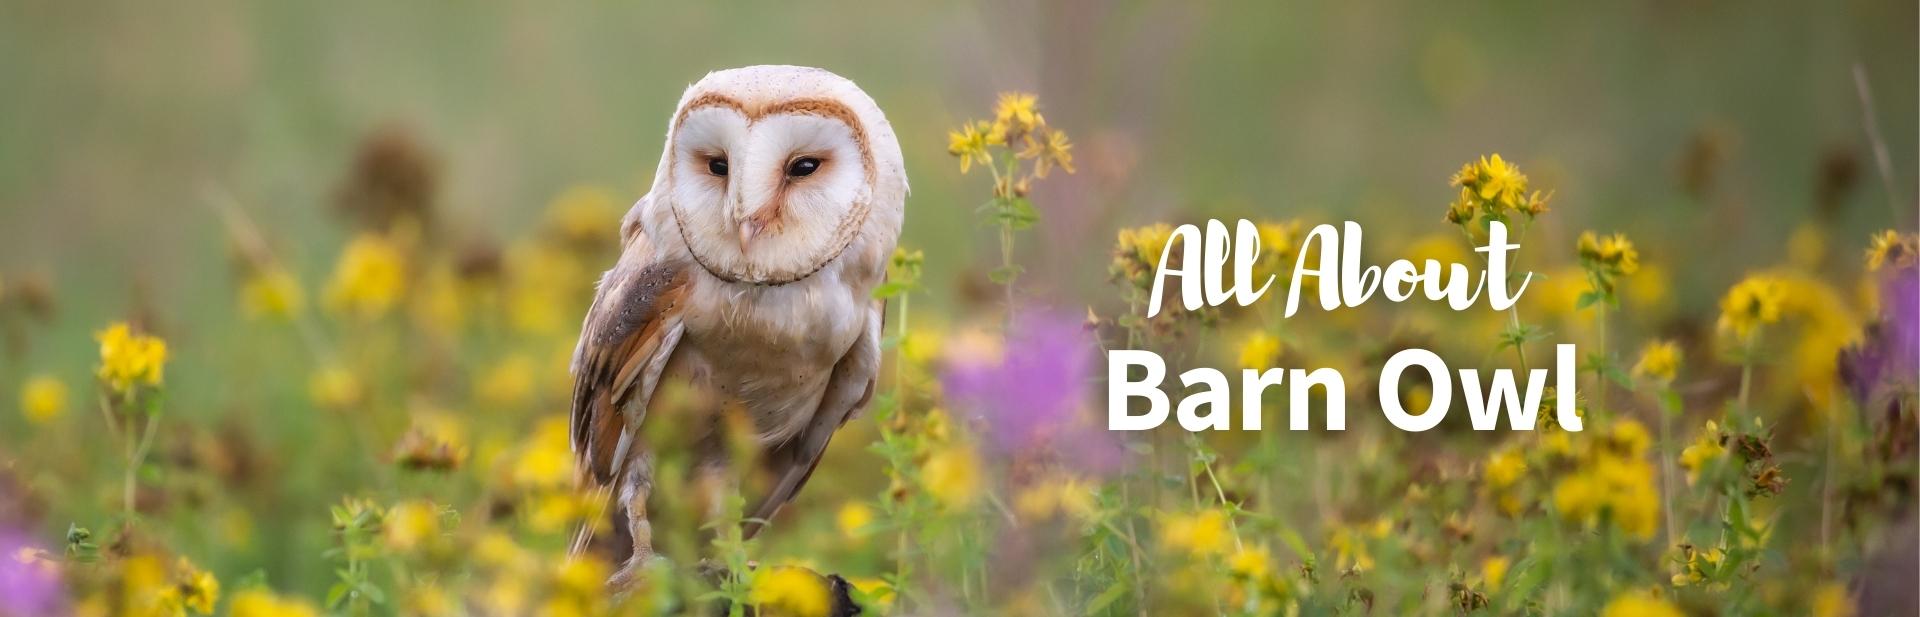 Barn Owl: The Ghostly Bird of Prey With a Heart-Shaped Face